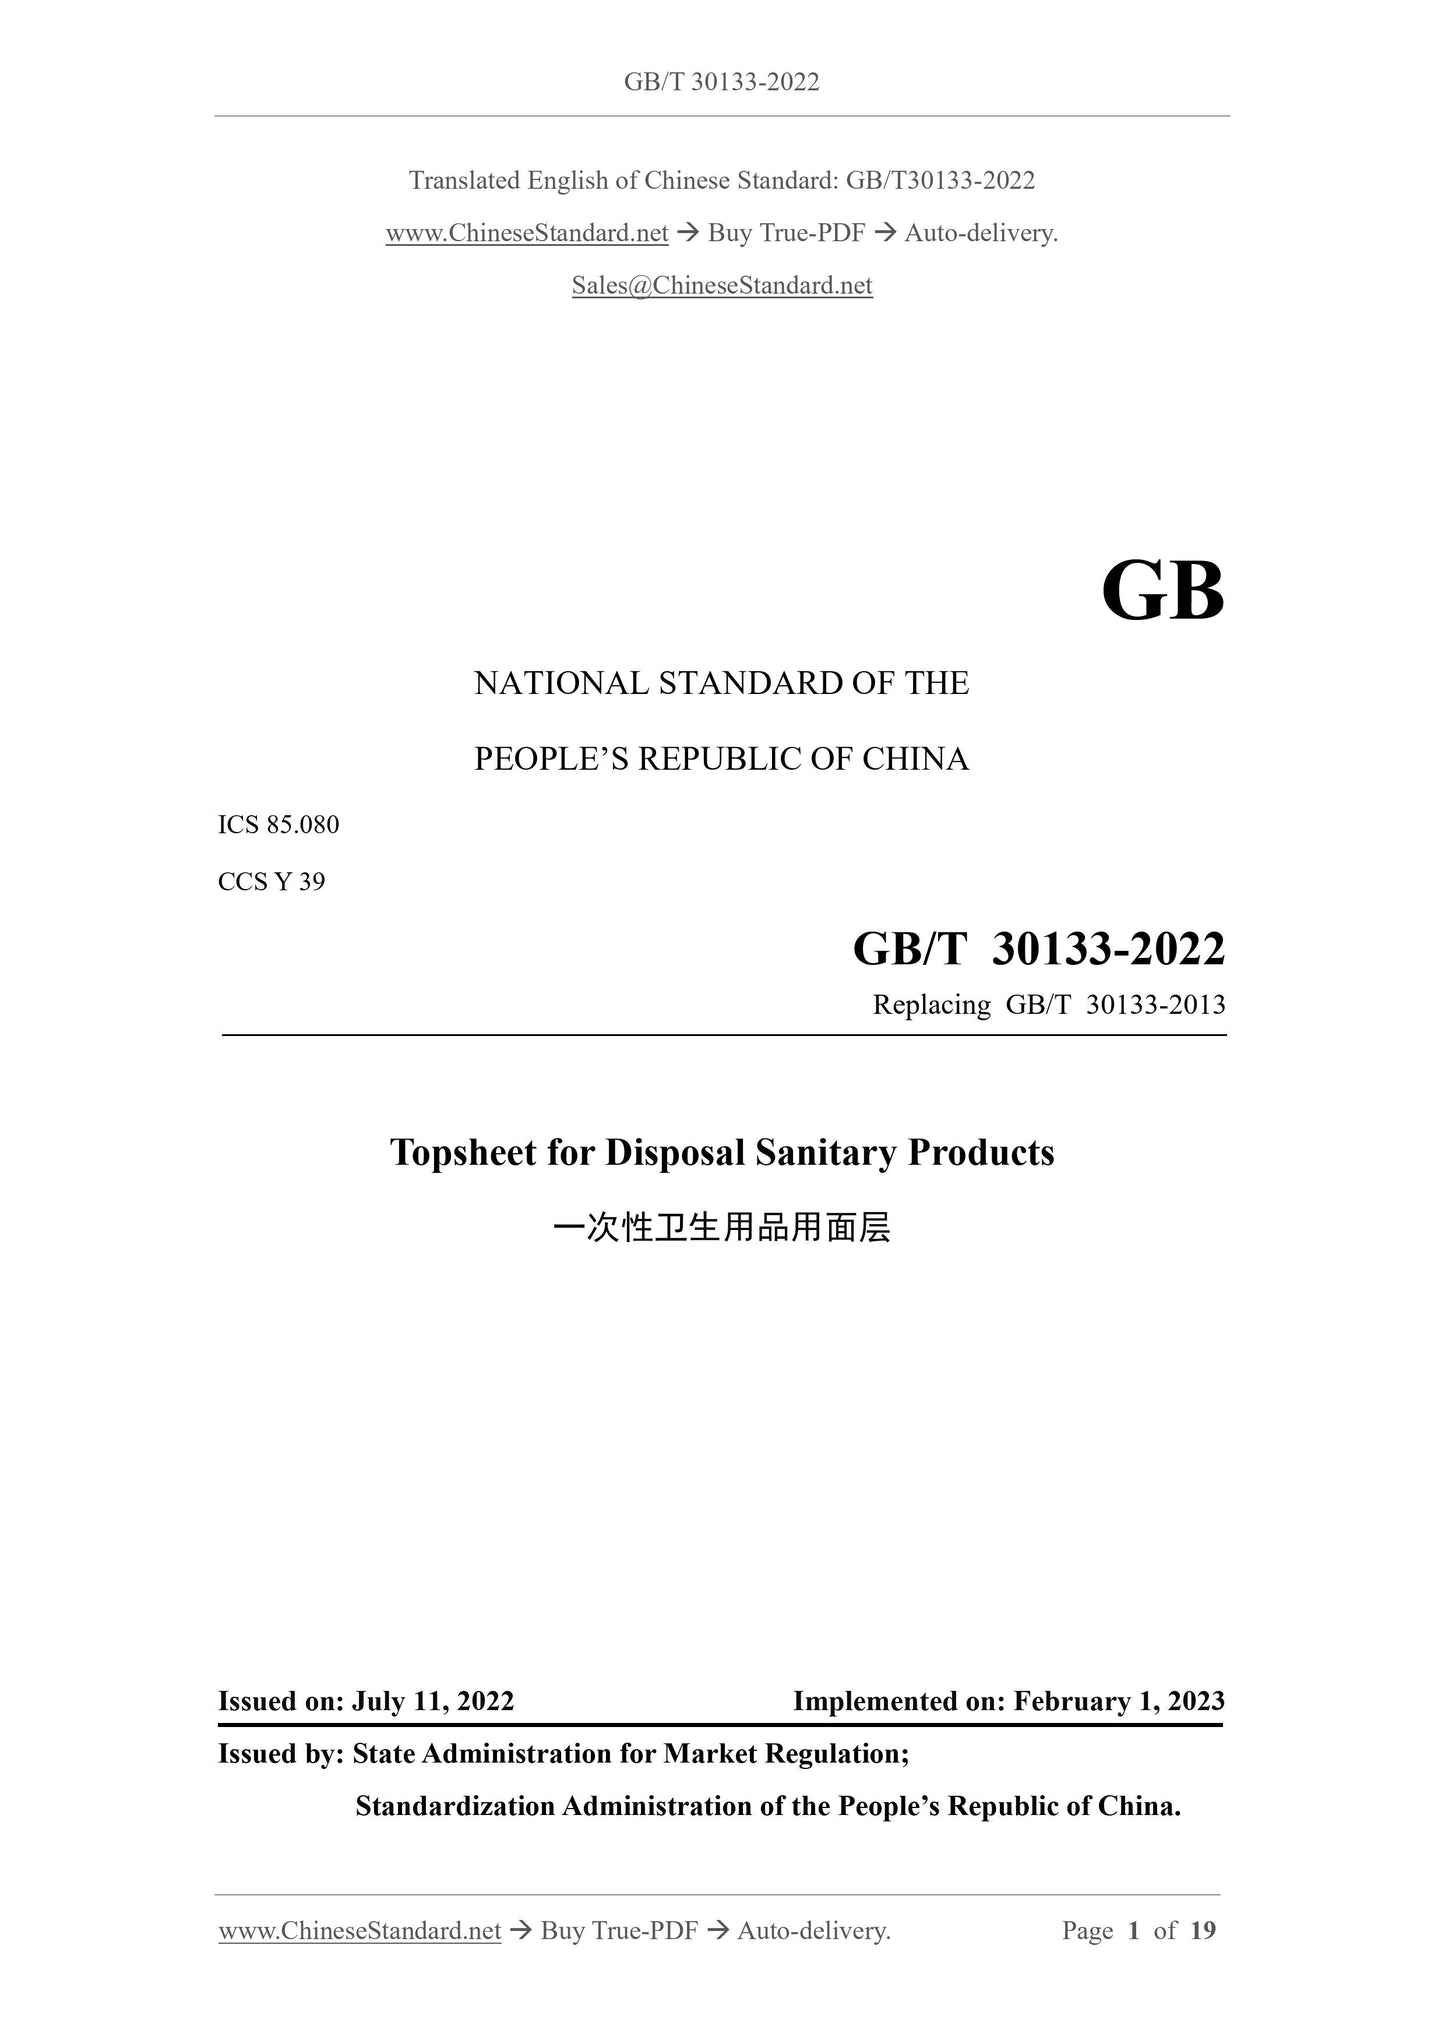 GB/T 30133-2022 Page 1